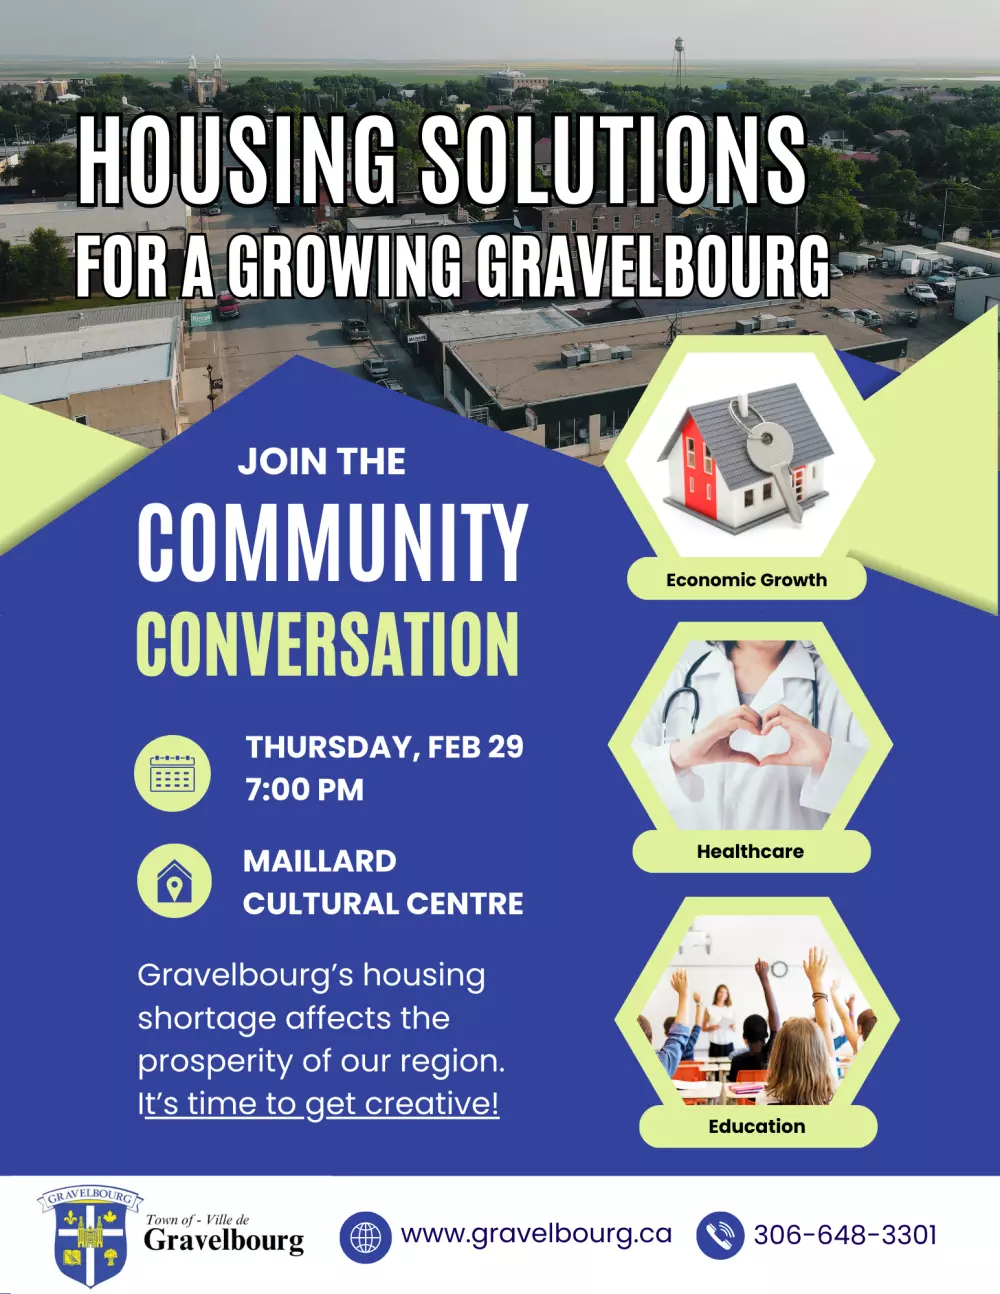 Housing Solutions for a Growing Gravelbourg: A Community Conversation